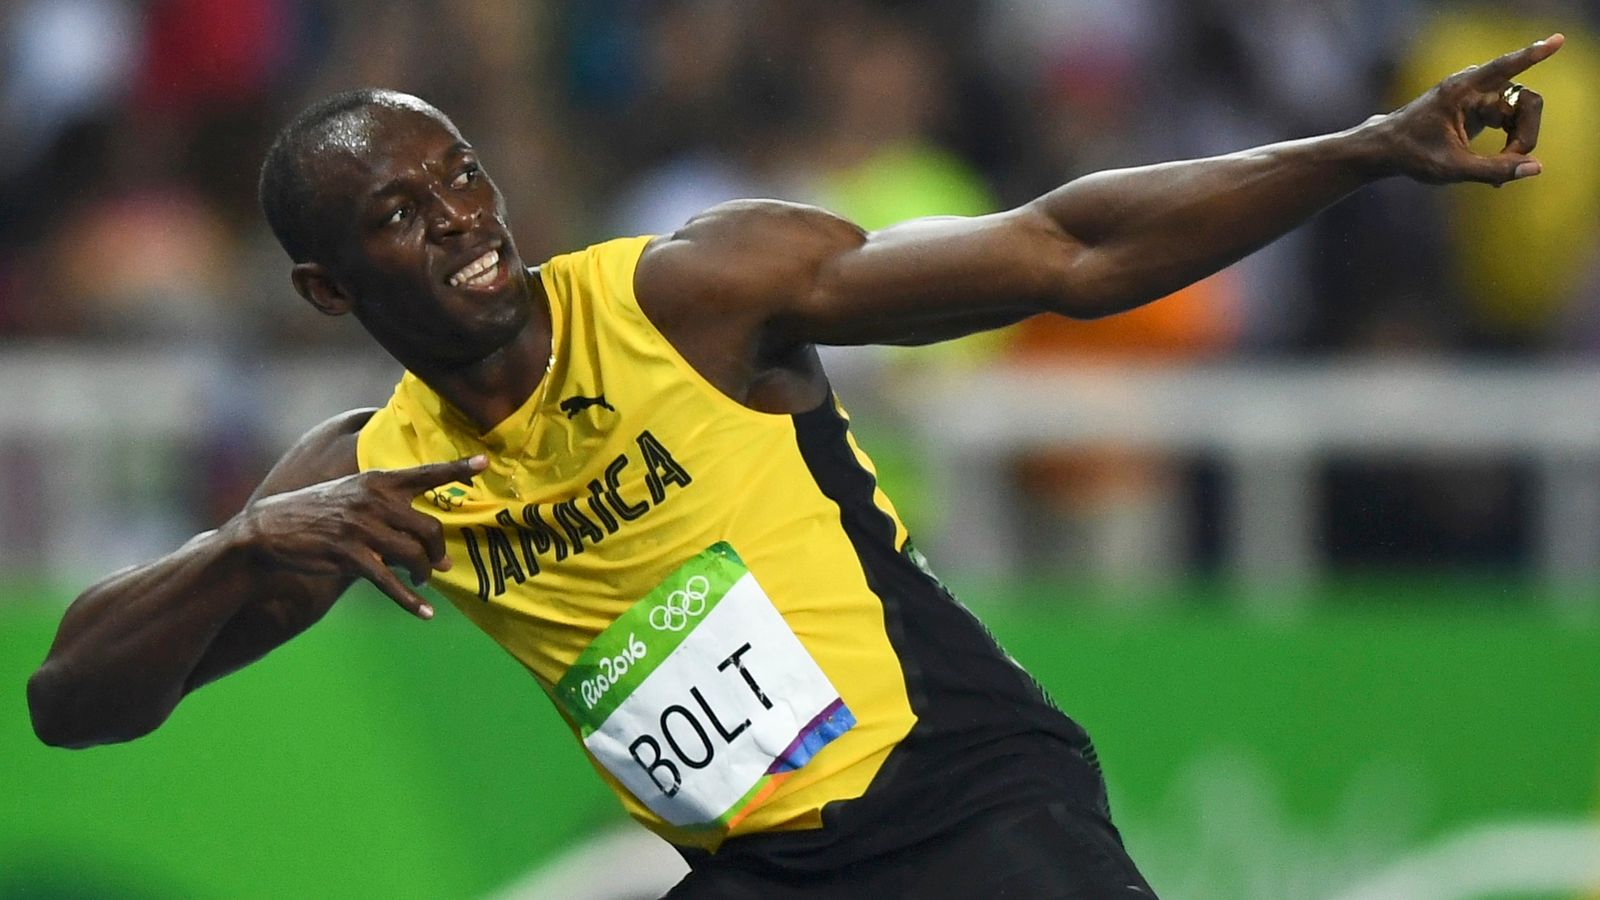 Usain Bolt moves to the trademark victory pose |  Economic news